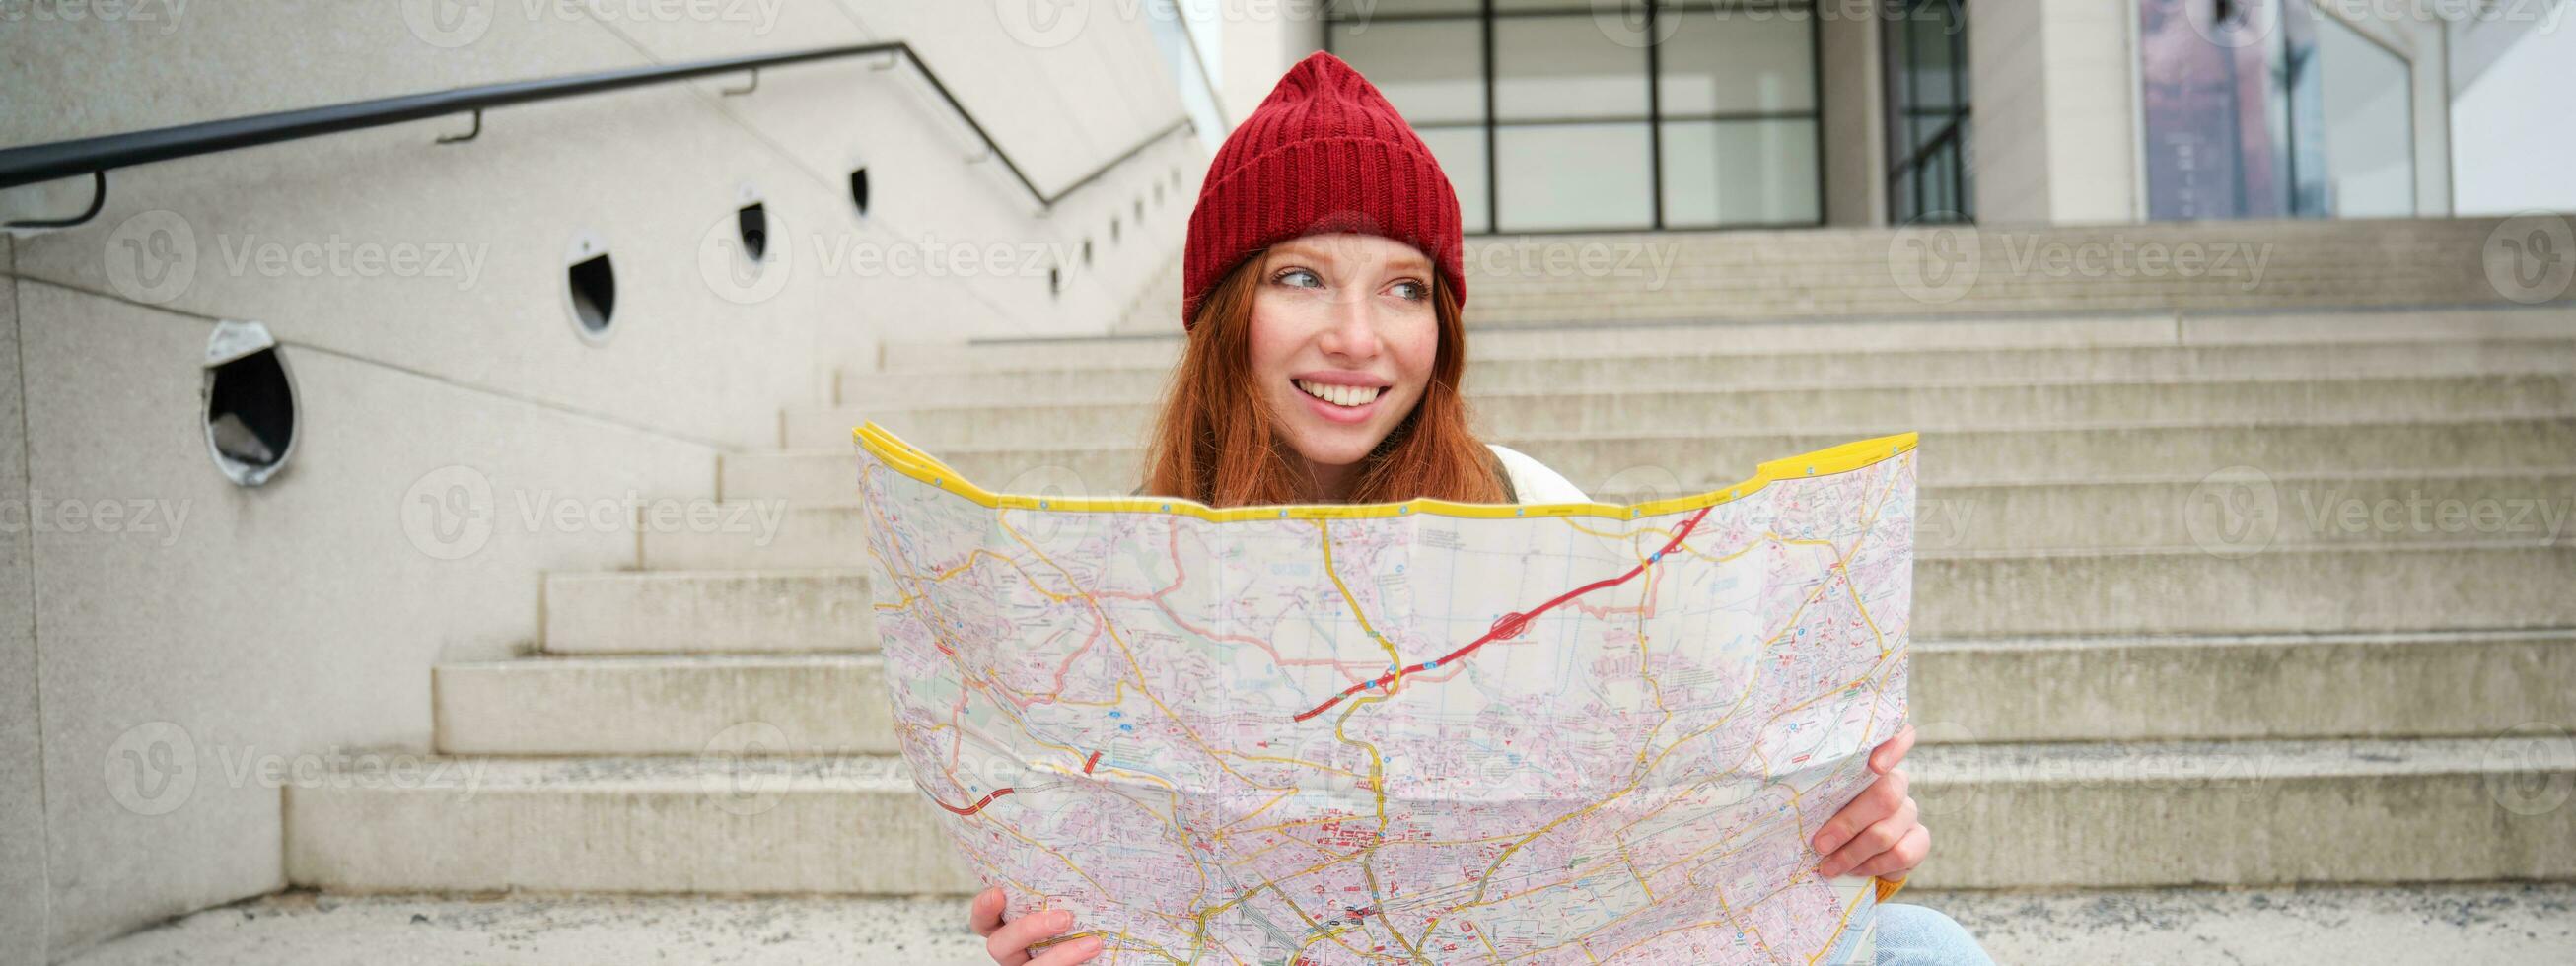 Young smiling redhead girl, tourist sits on stairs outdoors with city paper map, looking for direction, traveller backpacker explores city and looks for sightseeing photo